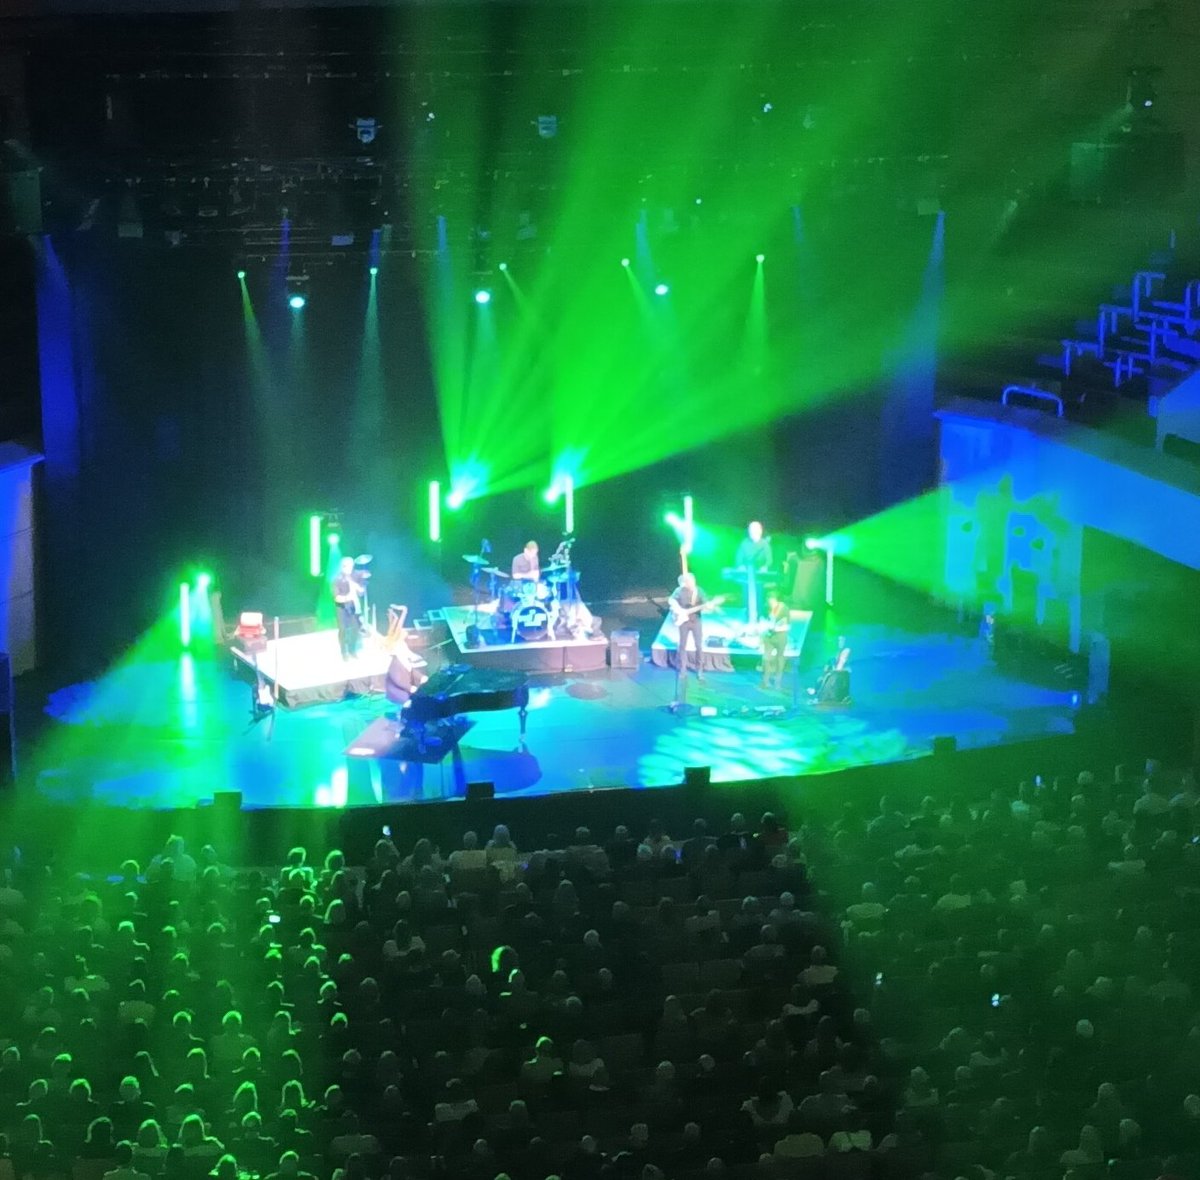 Absolutely tremendous night at The Glasgow Royal Concert Hall last night with @ElioPace leading us through The Billy Joel Songbook Fantastic night of story & song, with incredibly talented musicians